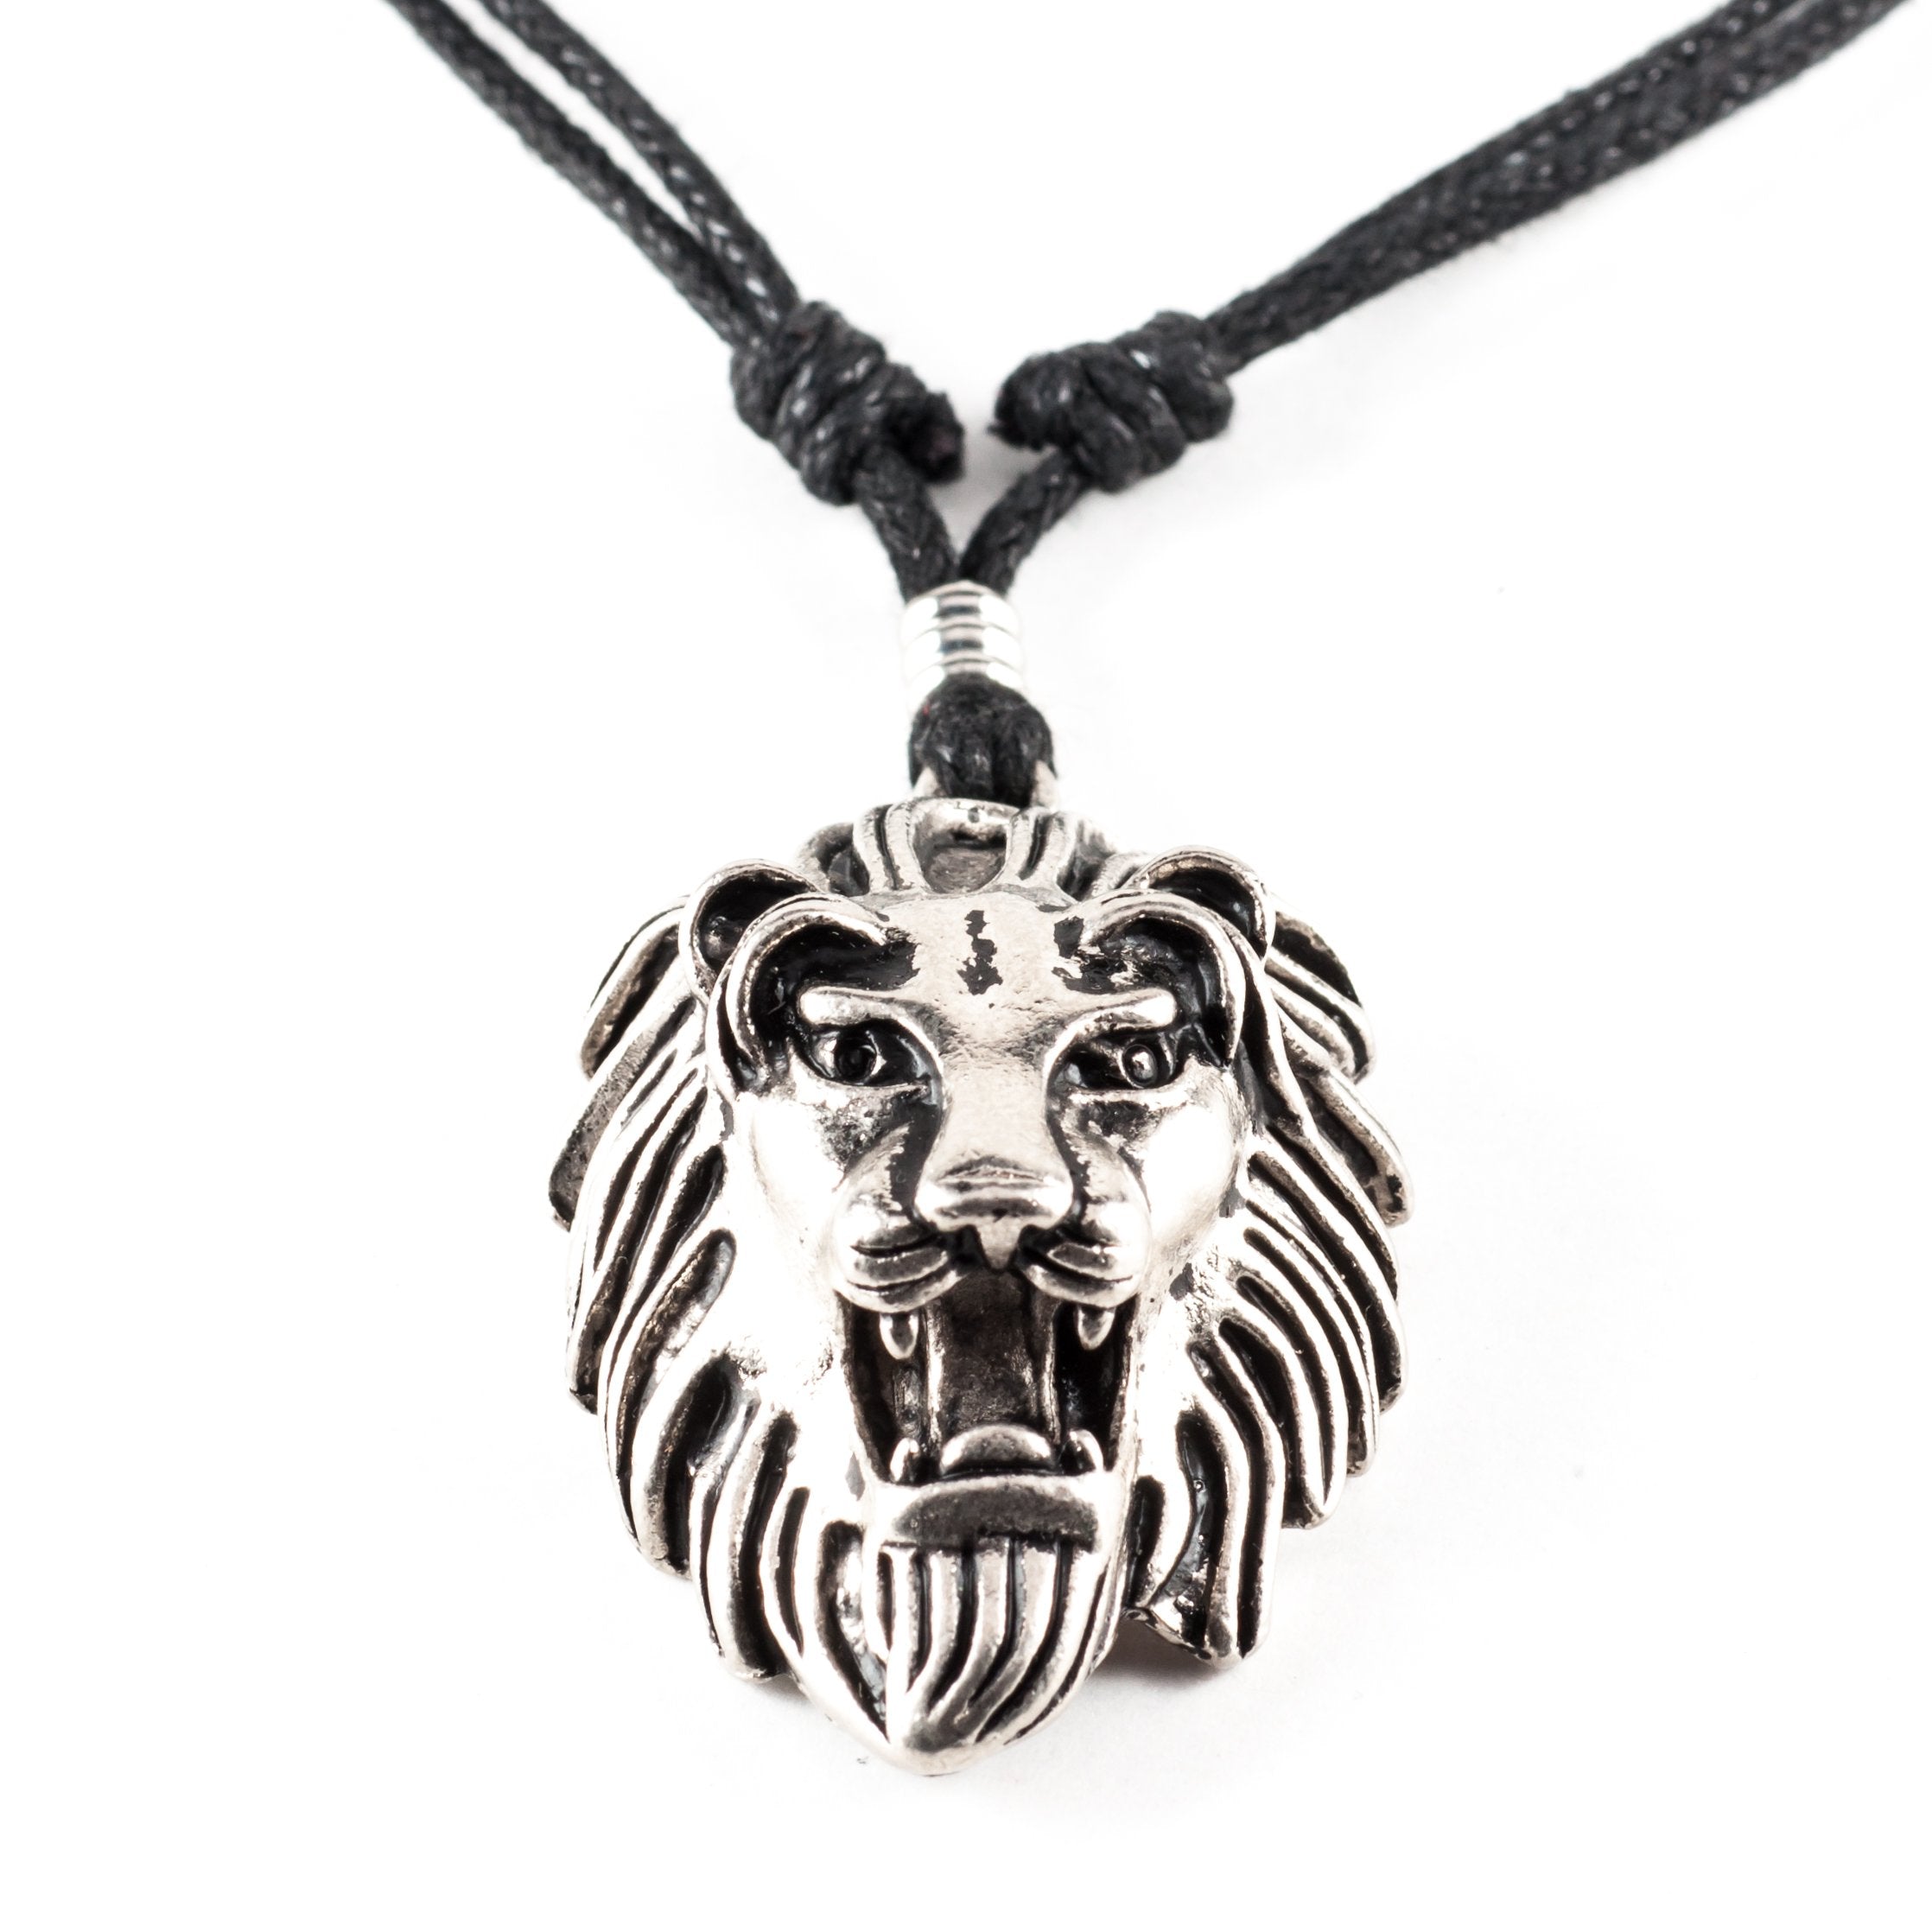 Lion Head Pendant on Adjustable Rope Necklace